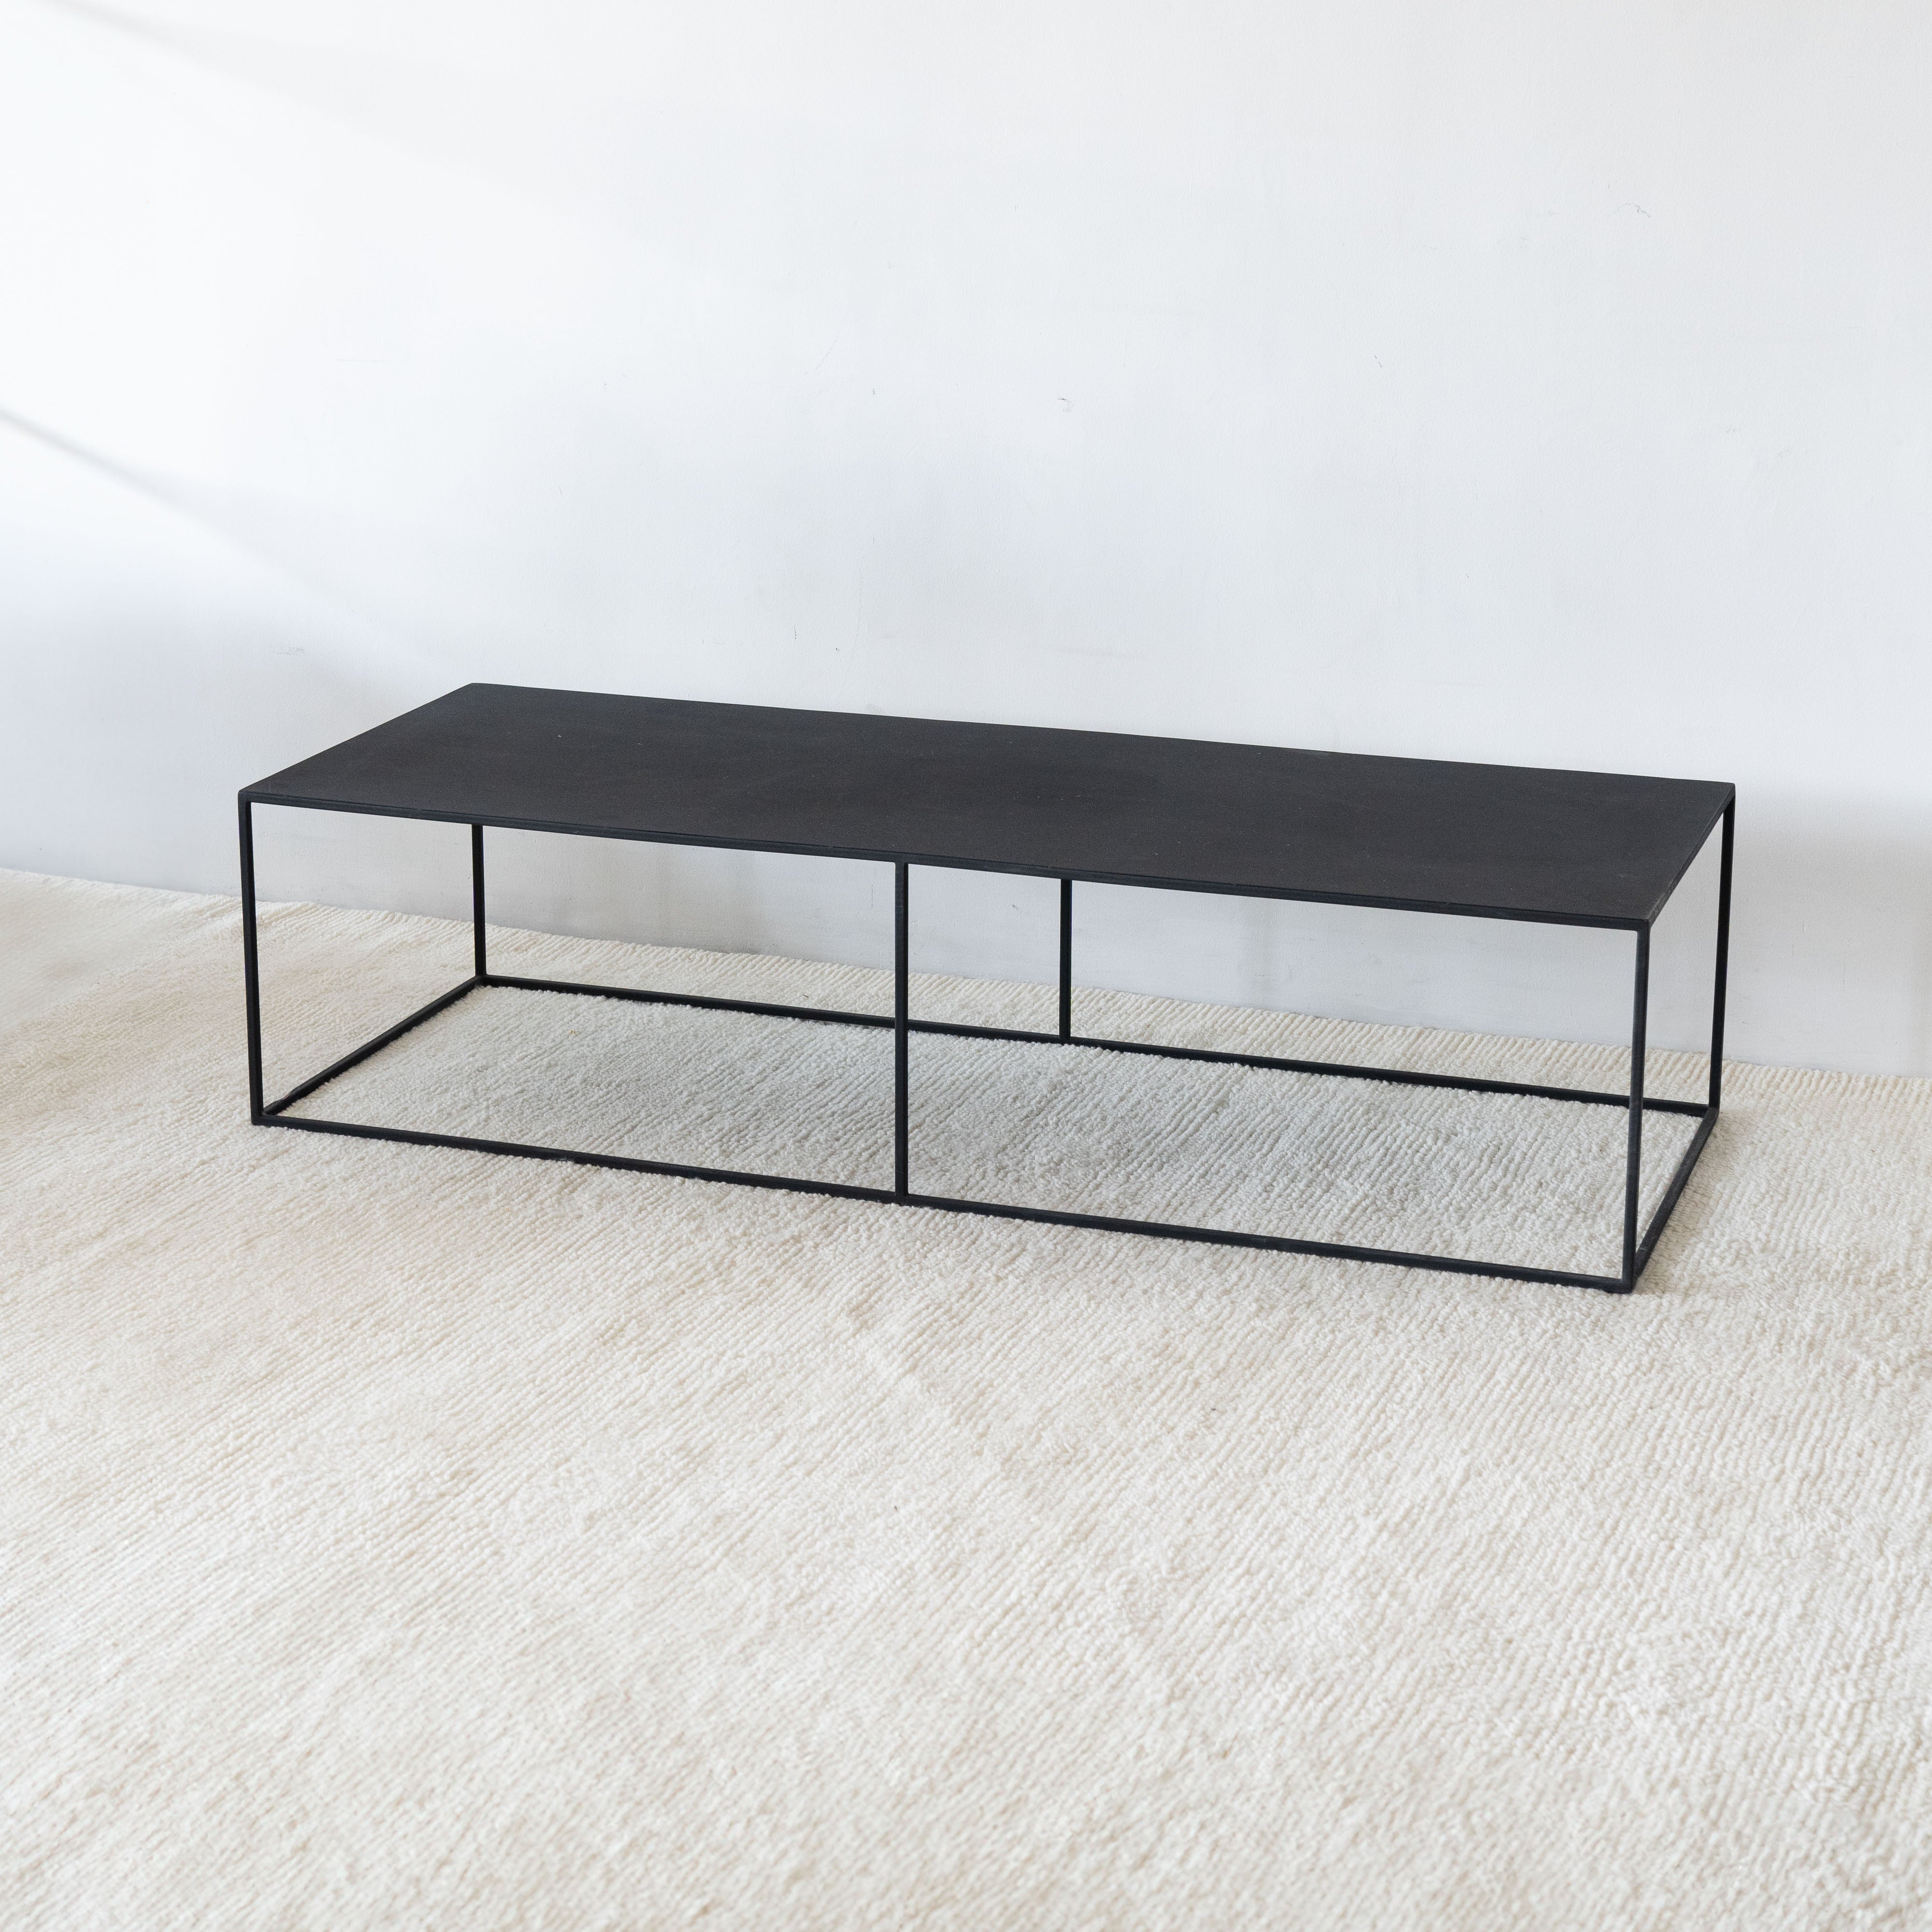 Monochrome Coffee Table - Wood and Steel Furnitures